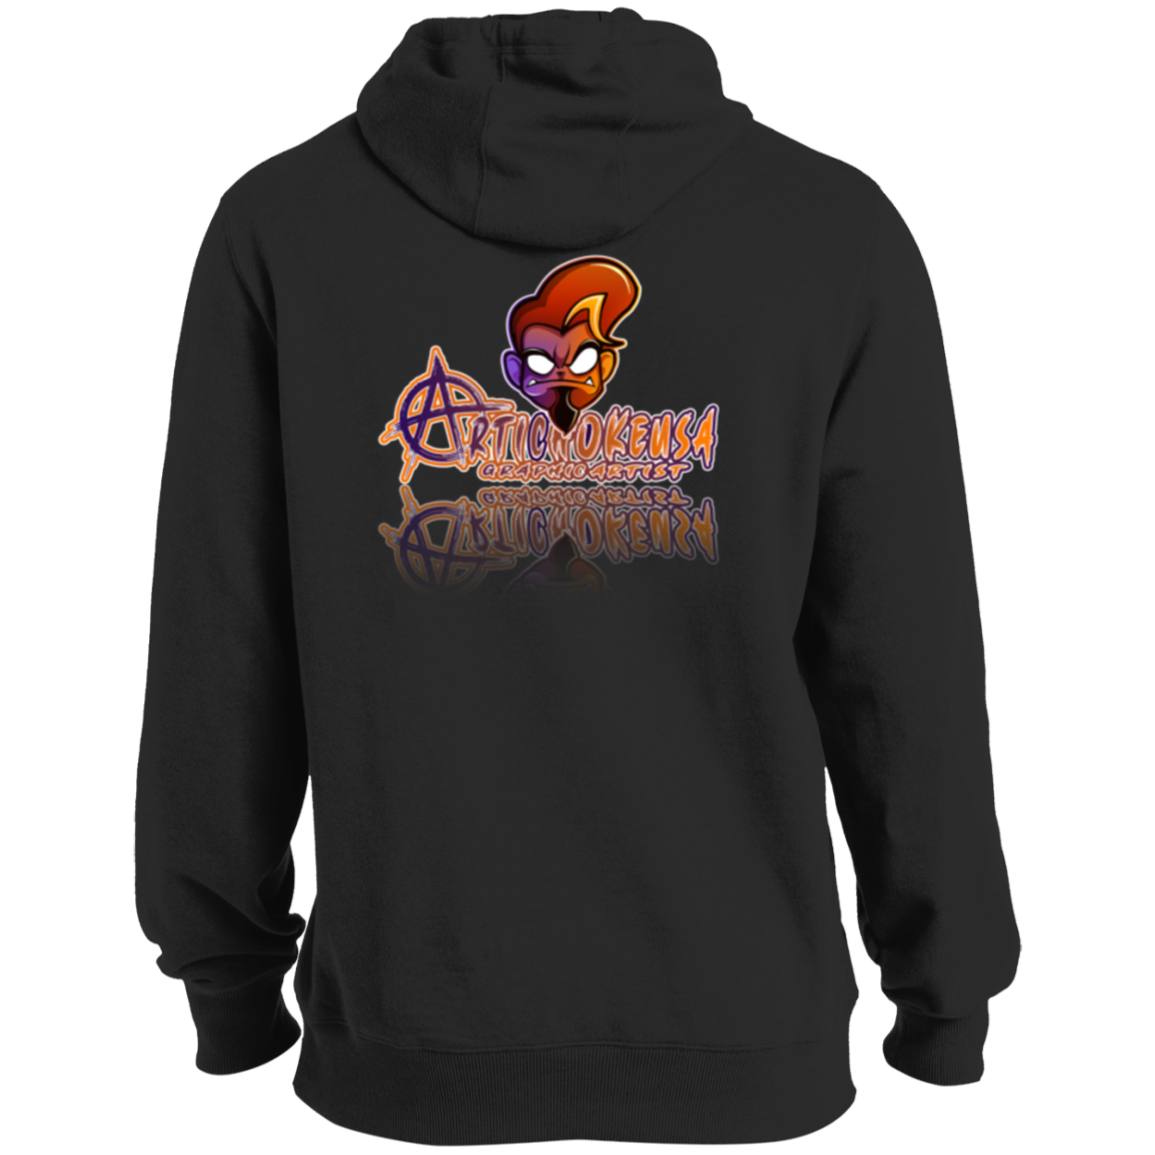 ArtichokeUSA Character & Font Design #1. Let's Design Your Own Design Today. Soft Pullover Hoodie